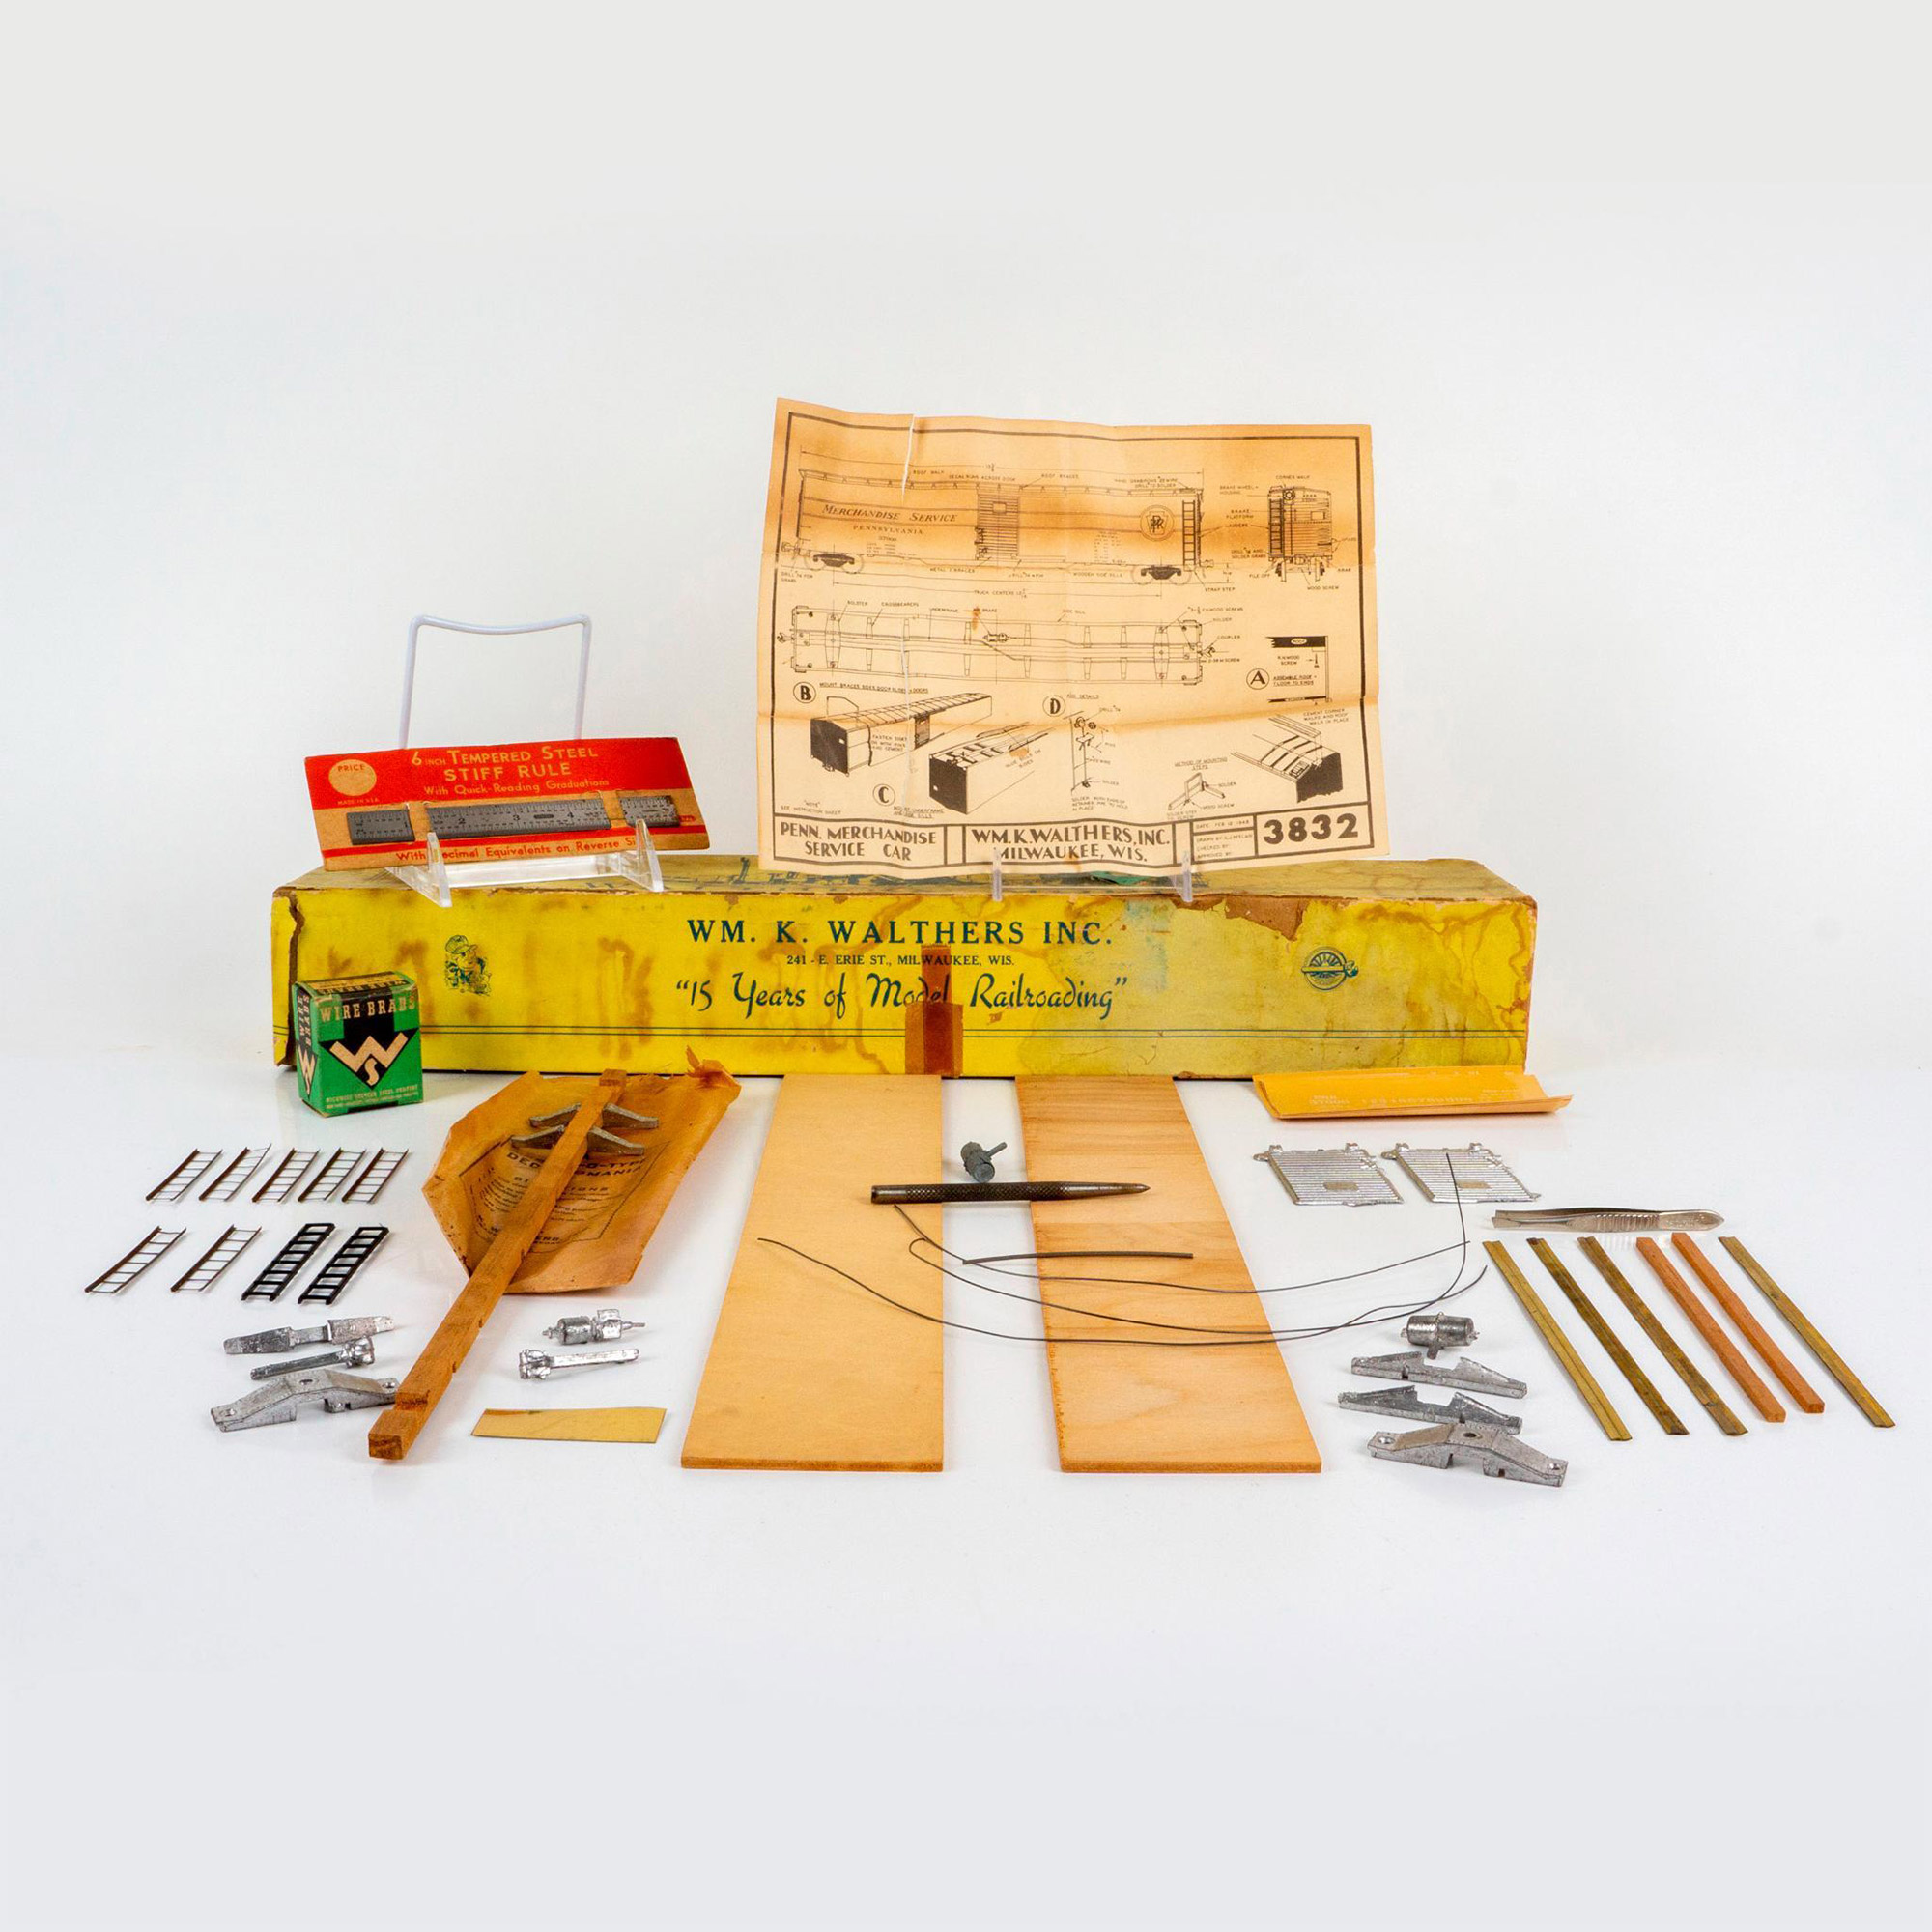 Vintage Walthers Models Railroads Train Kit Box with Parts - Image 3 of 3